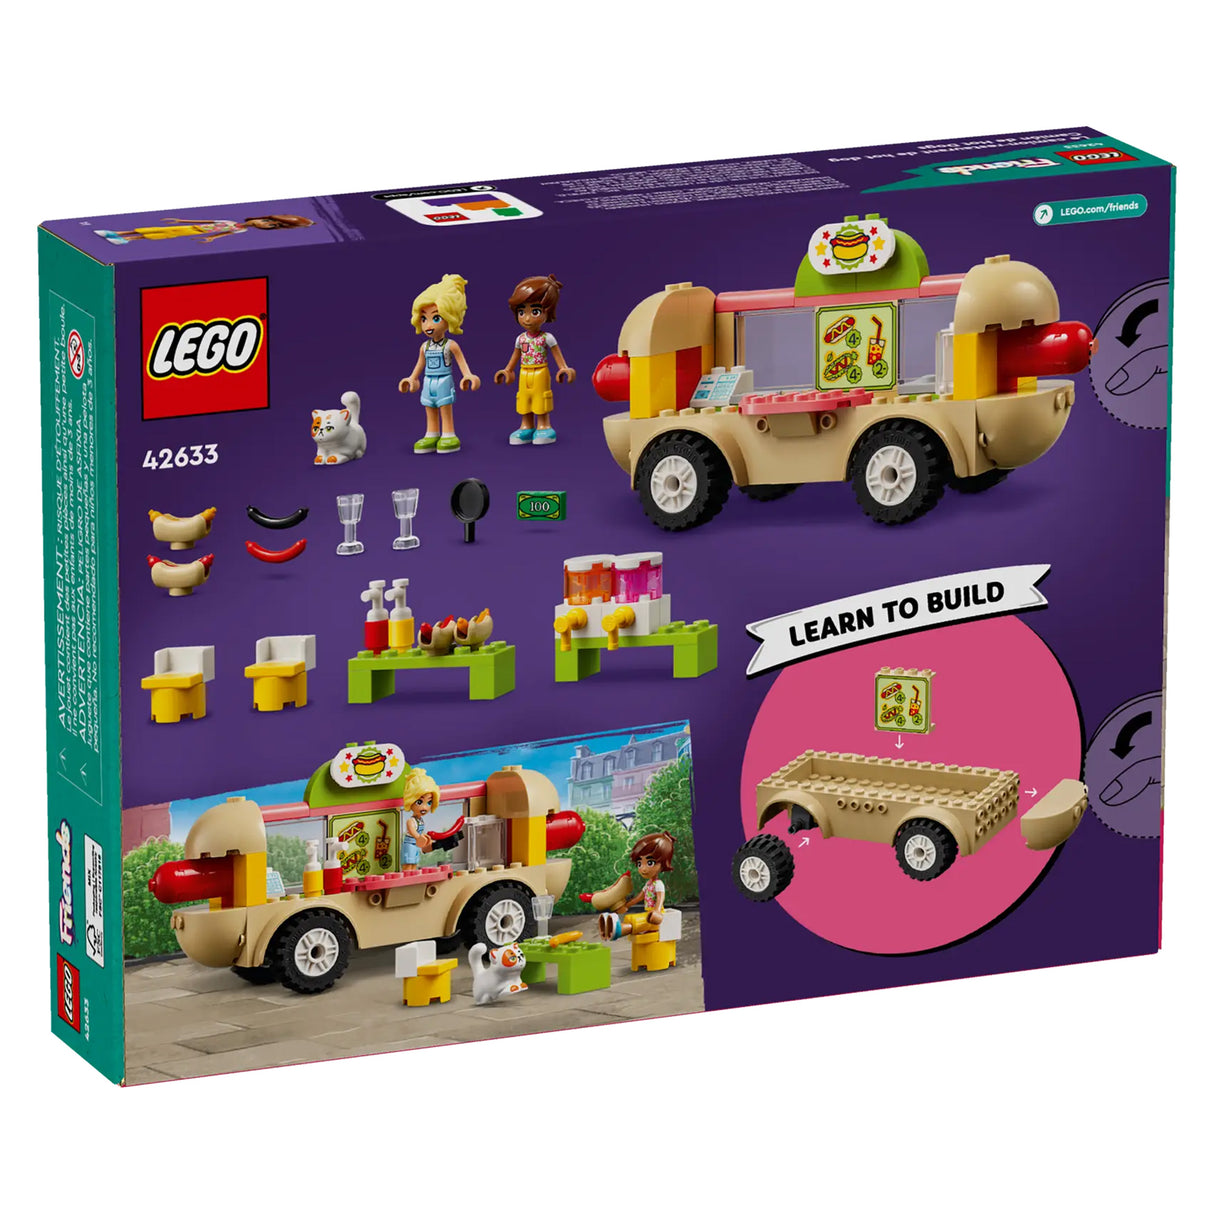 LEGO Friends Hot Dog Food Truck 42633, (100-pieces)